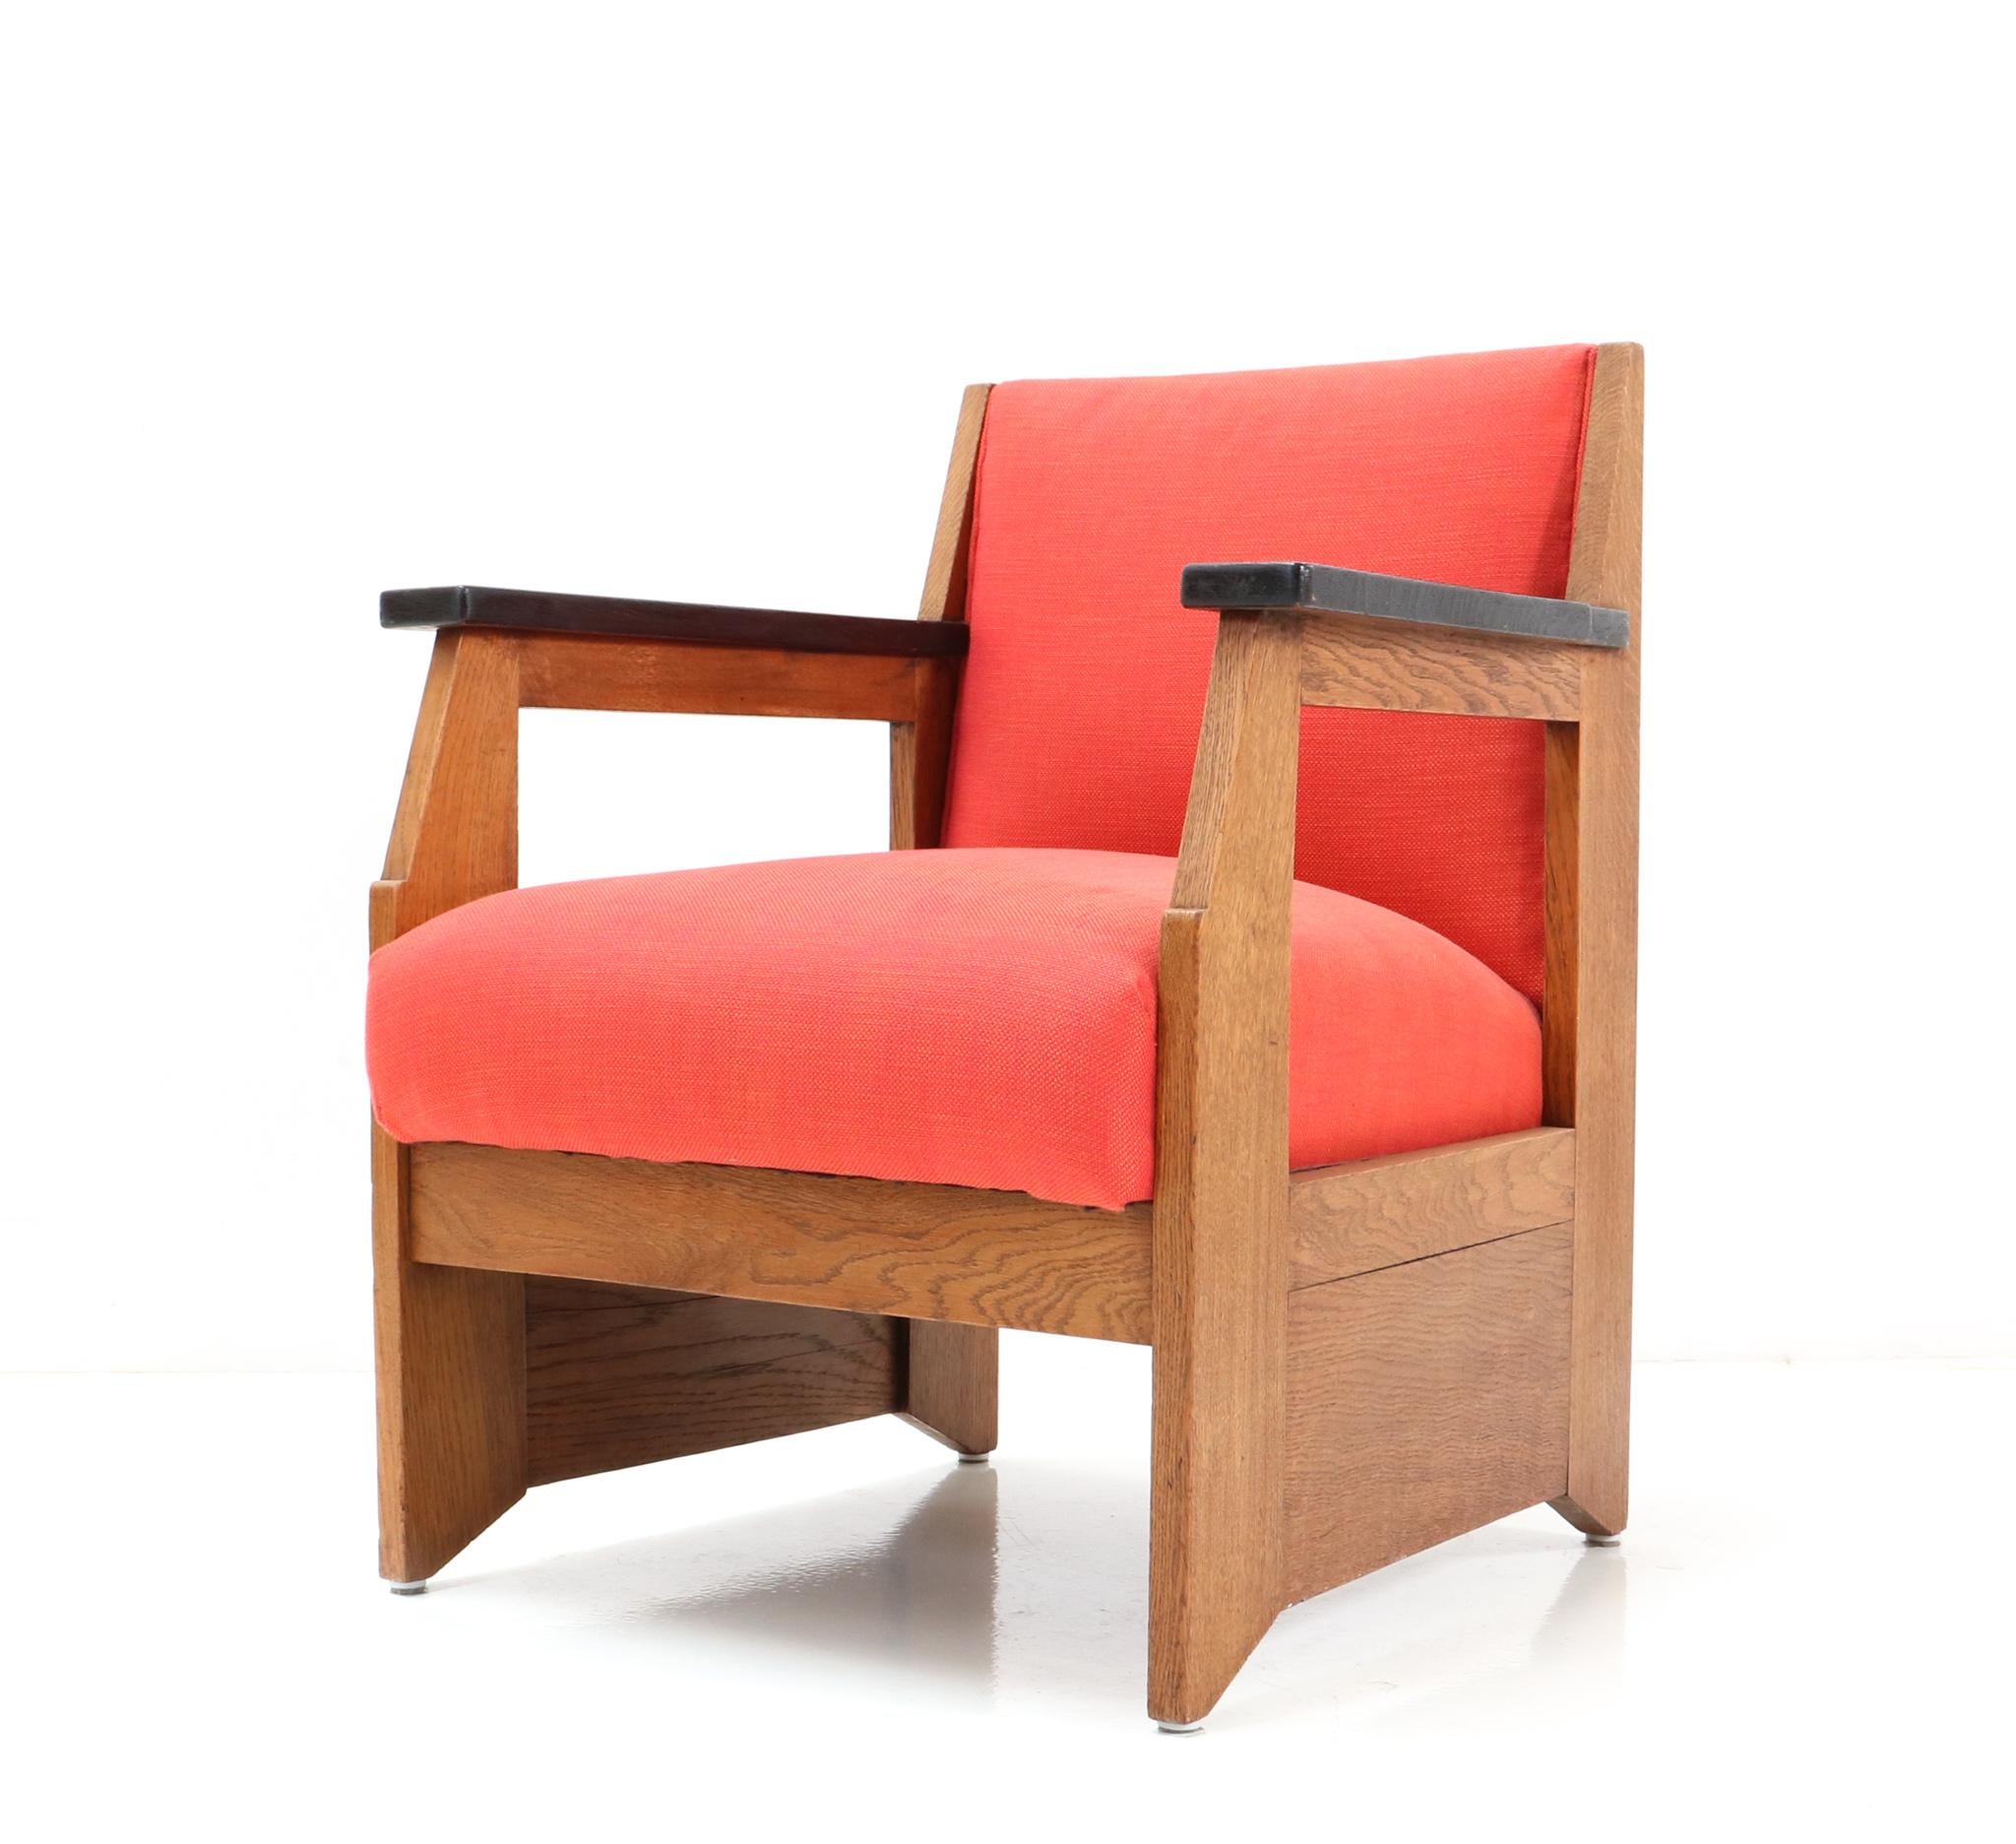 Pair of Oak Art Deco Modernist Easy Chairs by Hendrik Wouda for Pander, 1924 For Sale 2